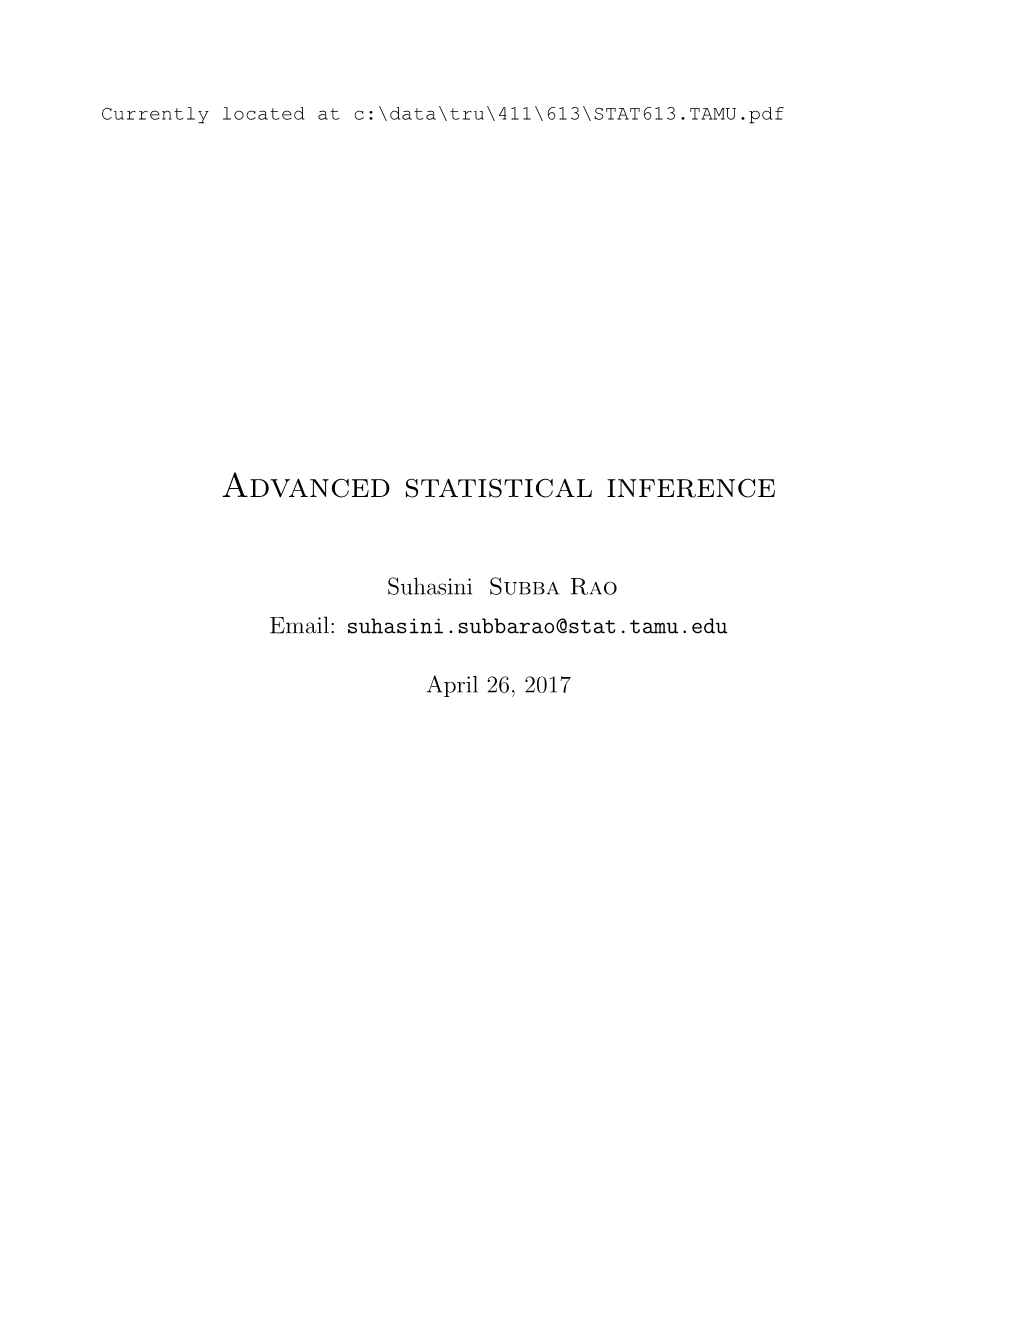 Advanced Statistical Inference